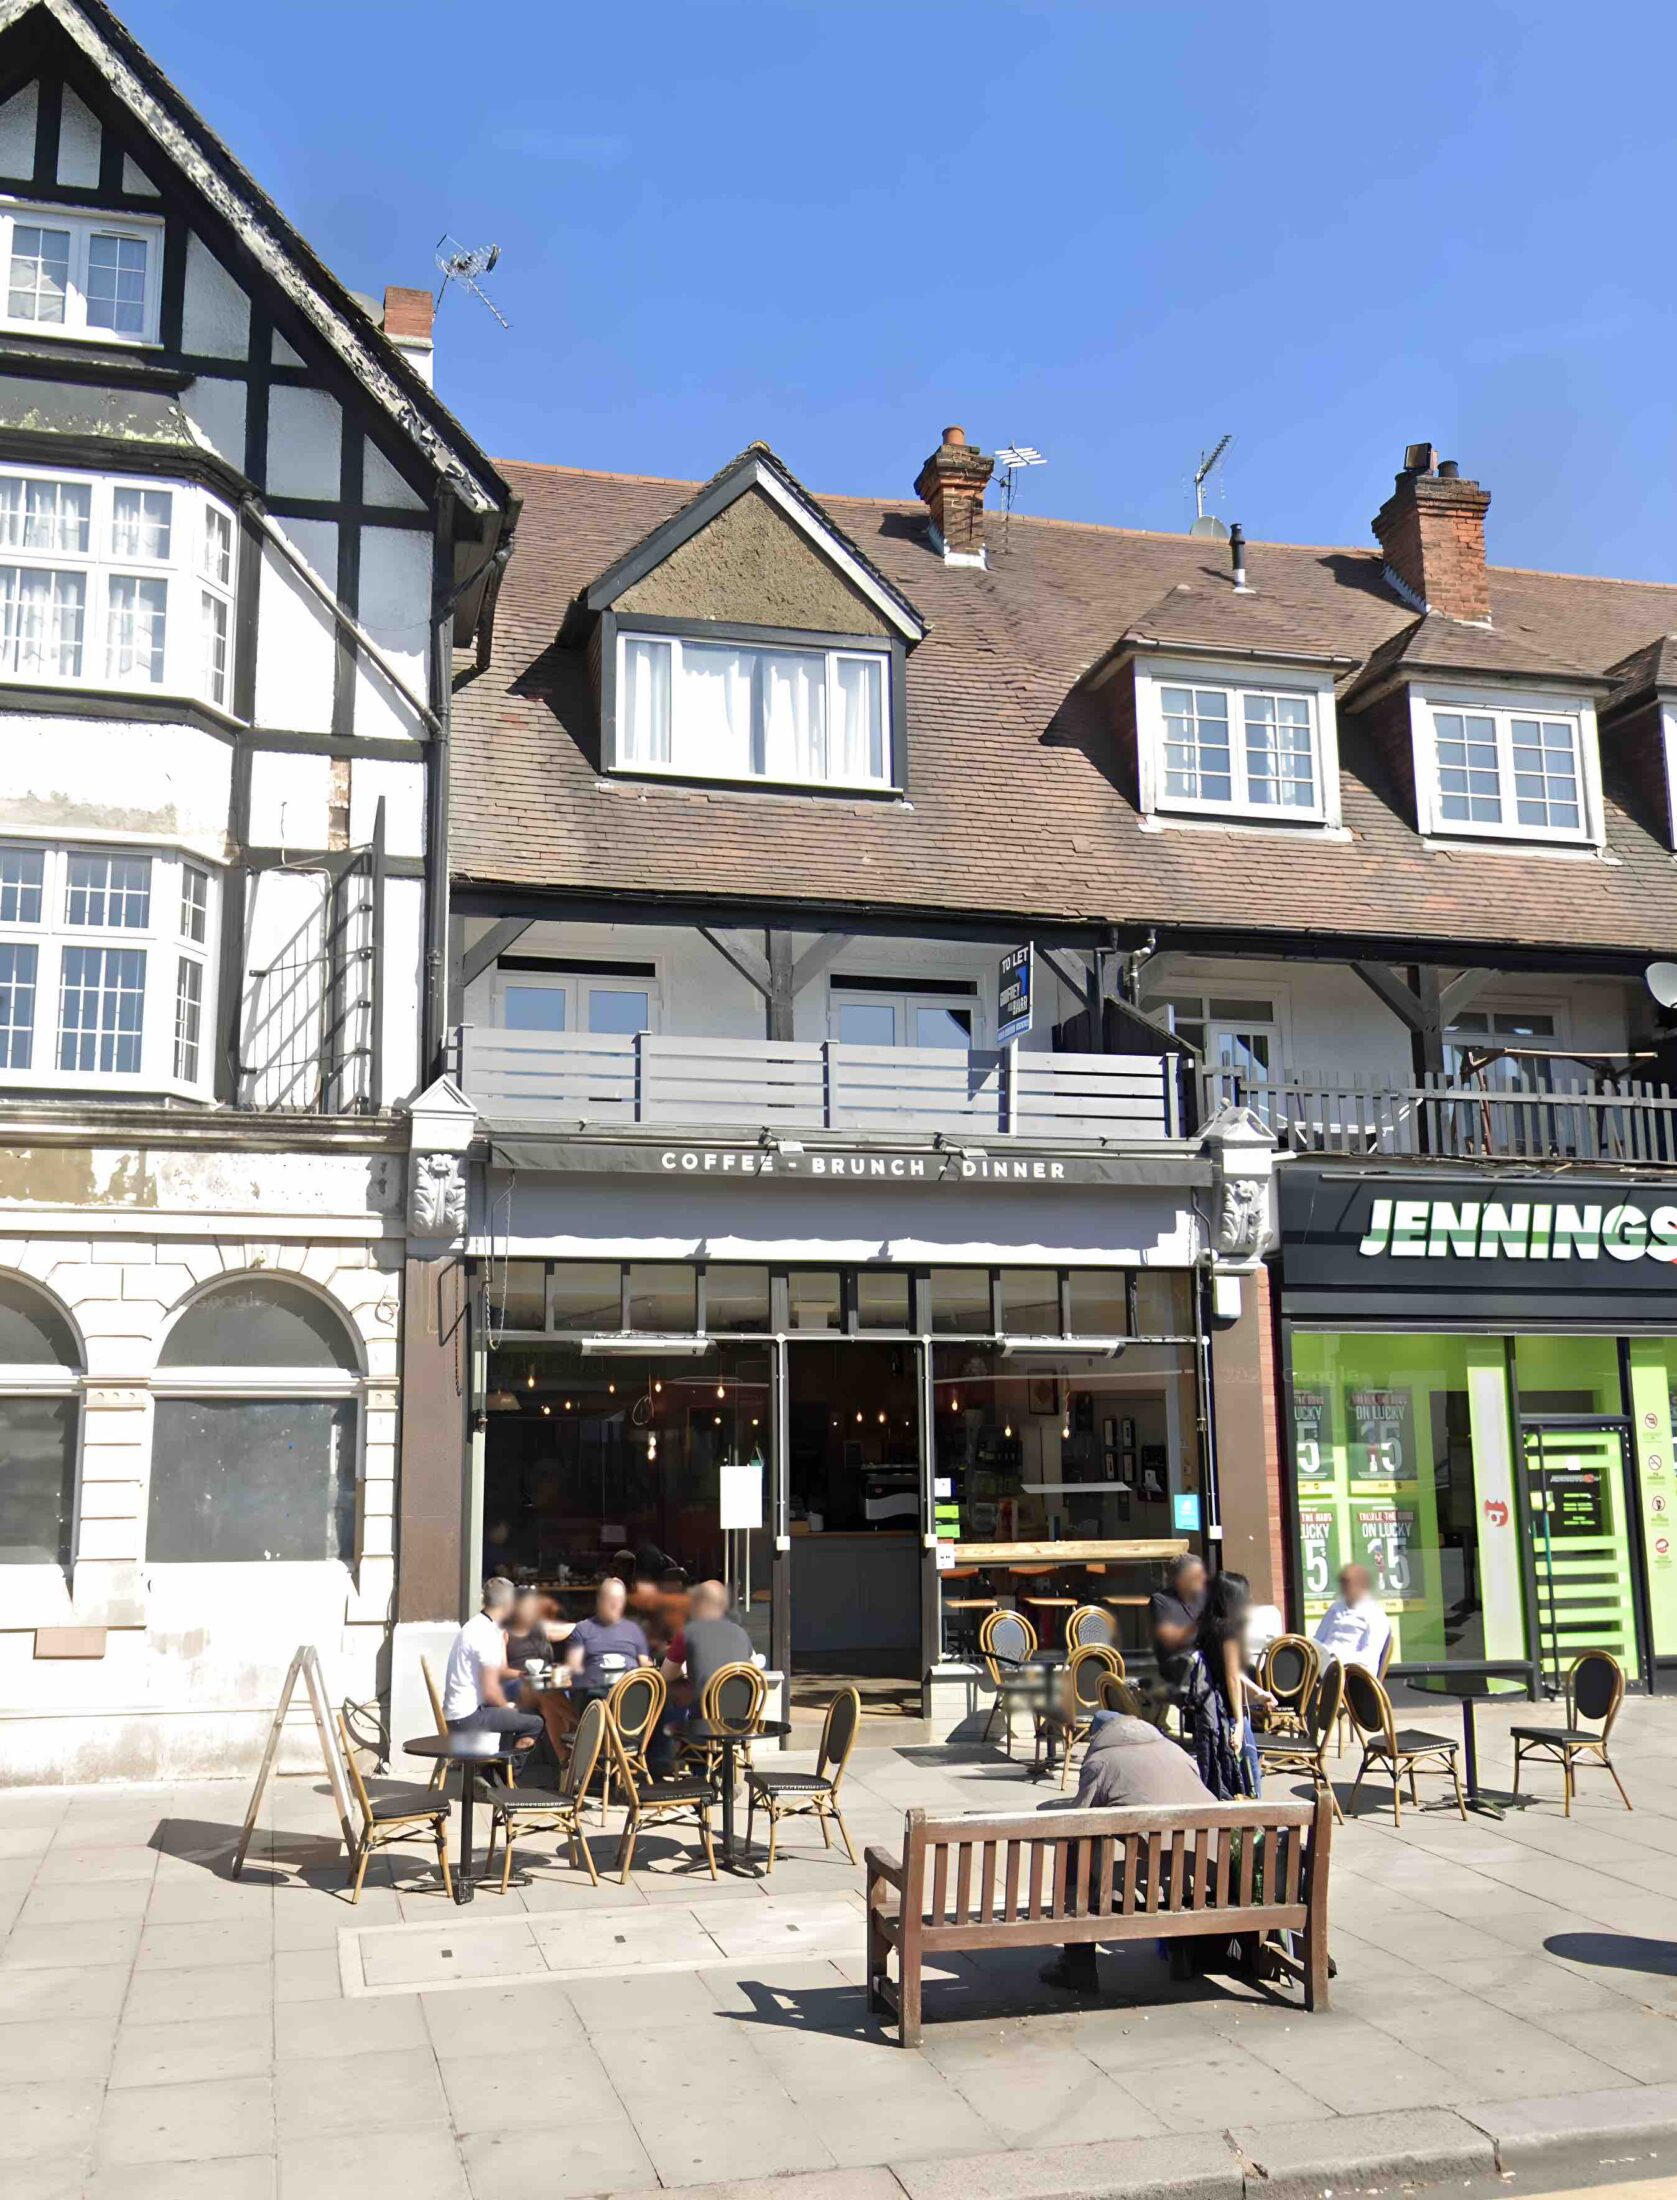 Mixed-Use Property Acquired in Mill Hill, NW7